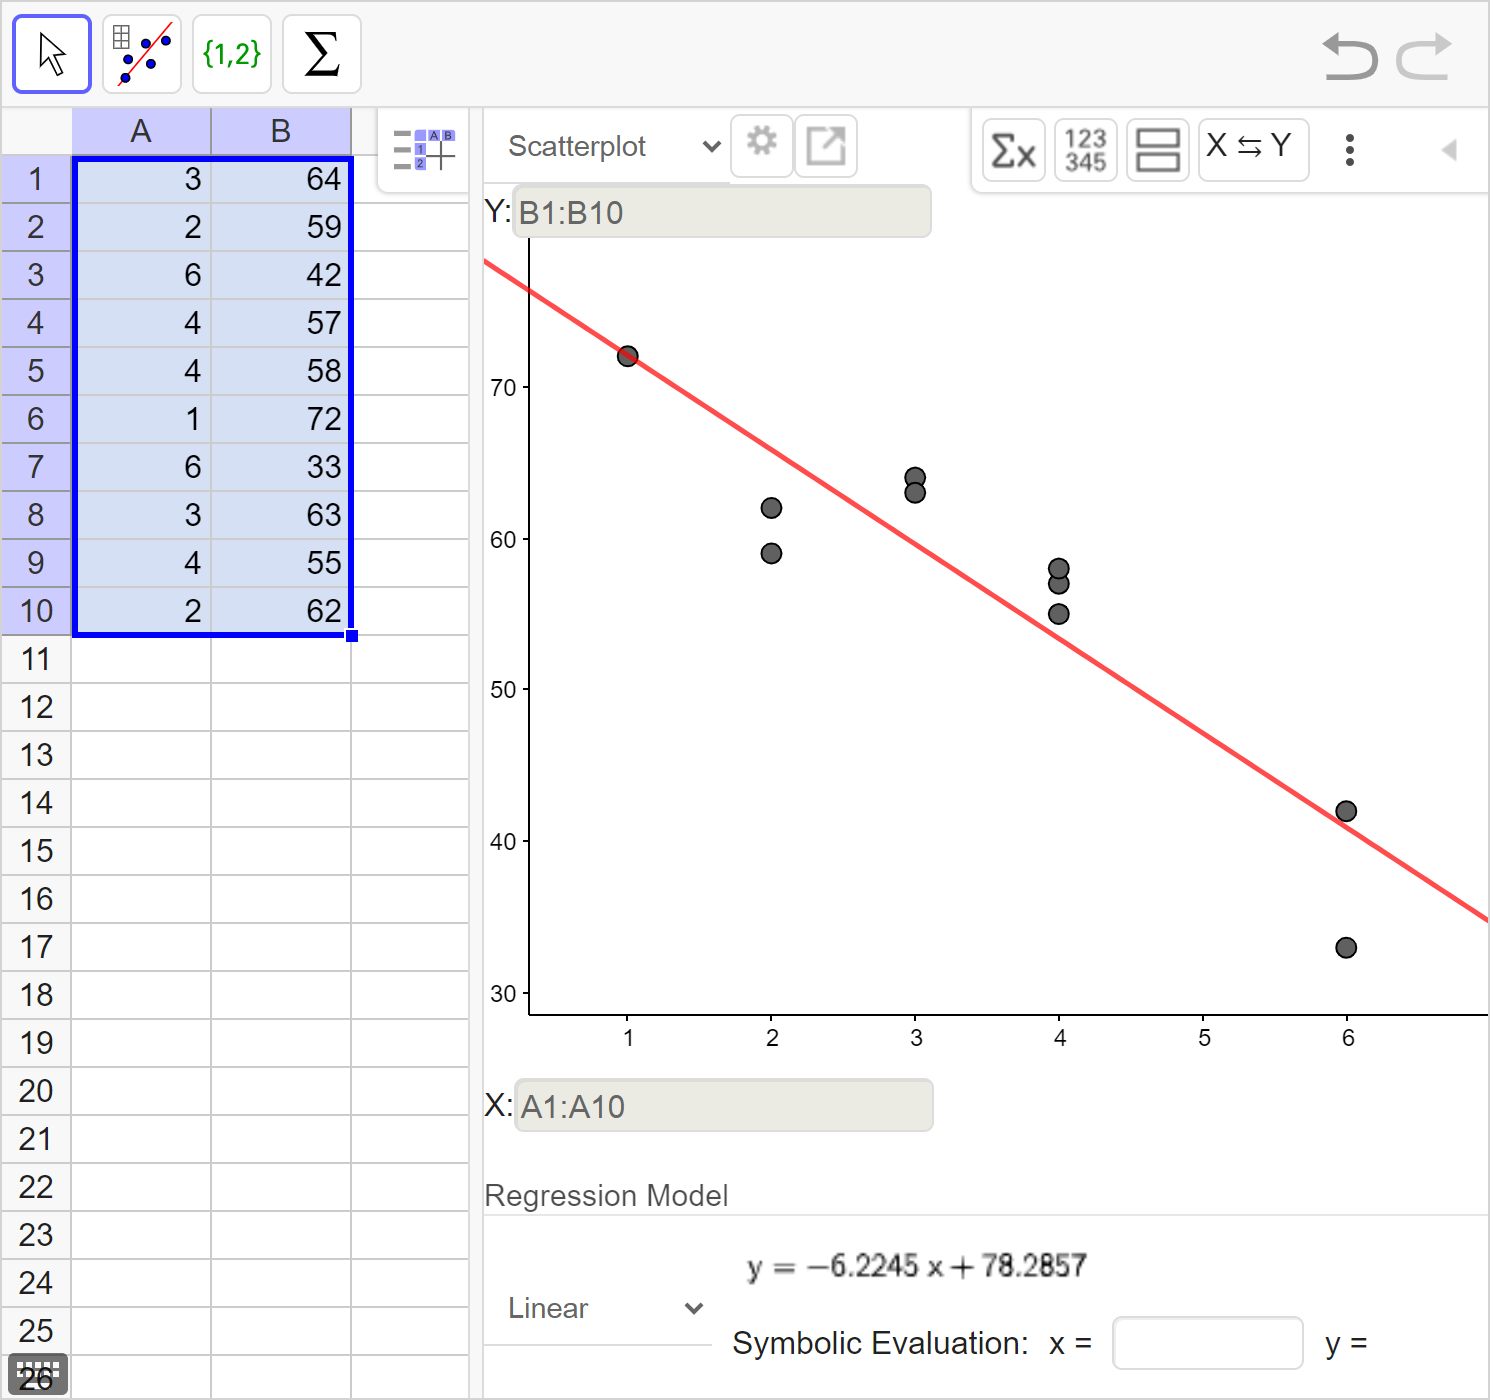 A screenshot of the GeoGebra statistics tool showing the following: On the left side: the numbers 3, 2, 6, 4, 4, 1, 6, 3, 4, and 2 in column A, rows 1 to 10 and the numbers 64, 59, 42, 57, 58, 72, 33, 63, 55, and 62 in column B, rows 1 to 10. The cells from column A, rows 1 to 10, and column B, rows 1 to 10, are selected. On the right side: a scatterplot and the line of best fit are shown. Speak to your teacher for more details.